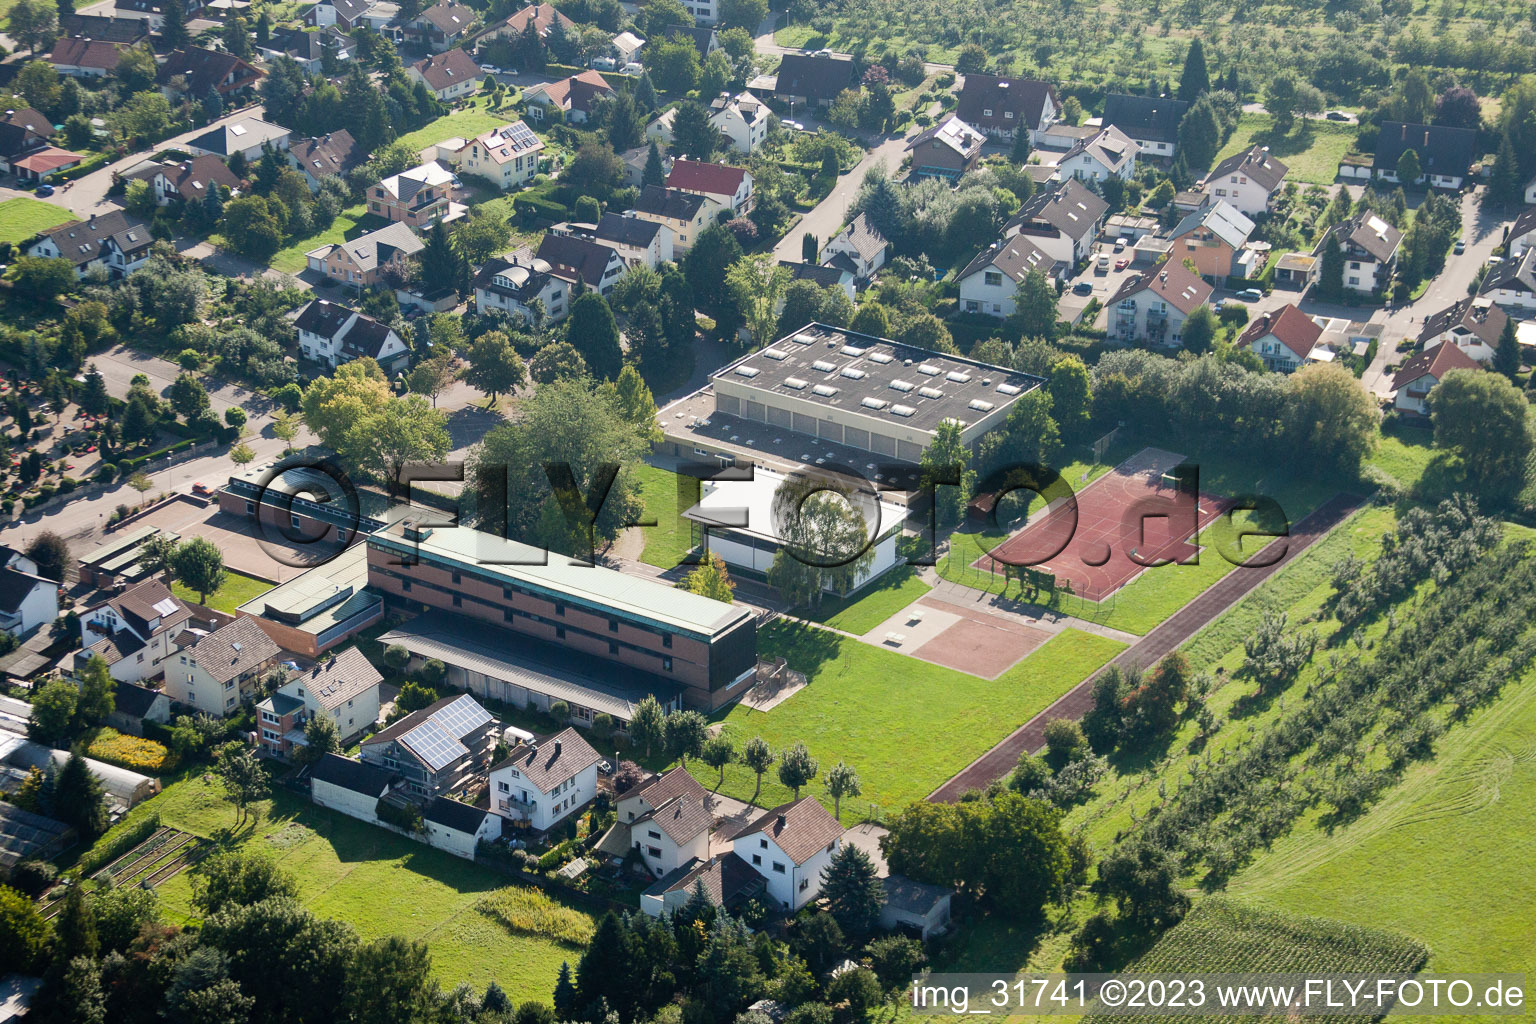 Maria Victoria School in Ottersweier in the state Baden-Wuerttemberg, Germany